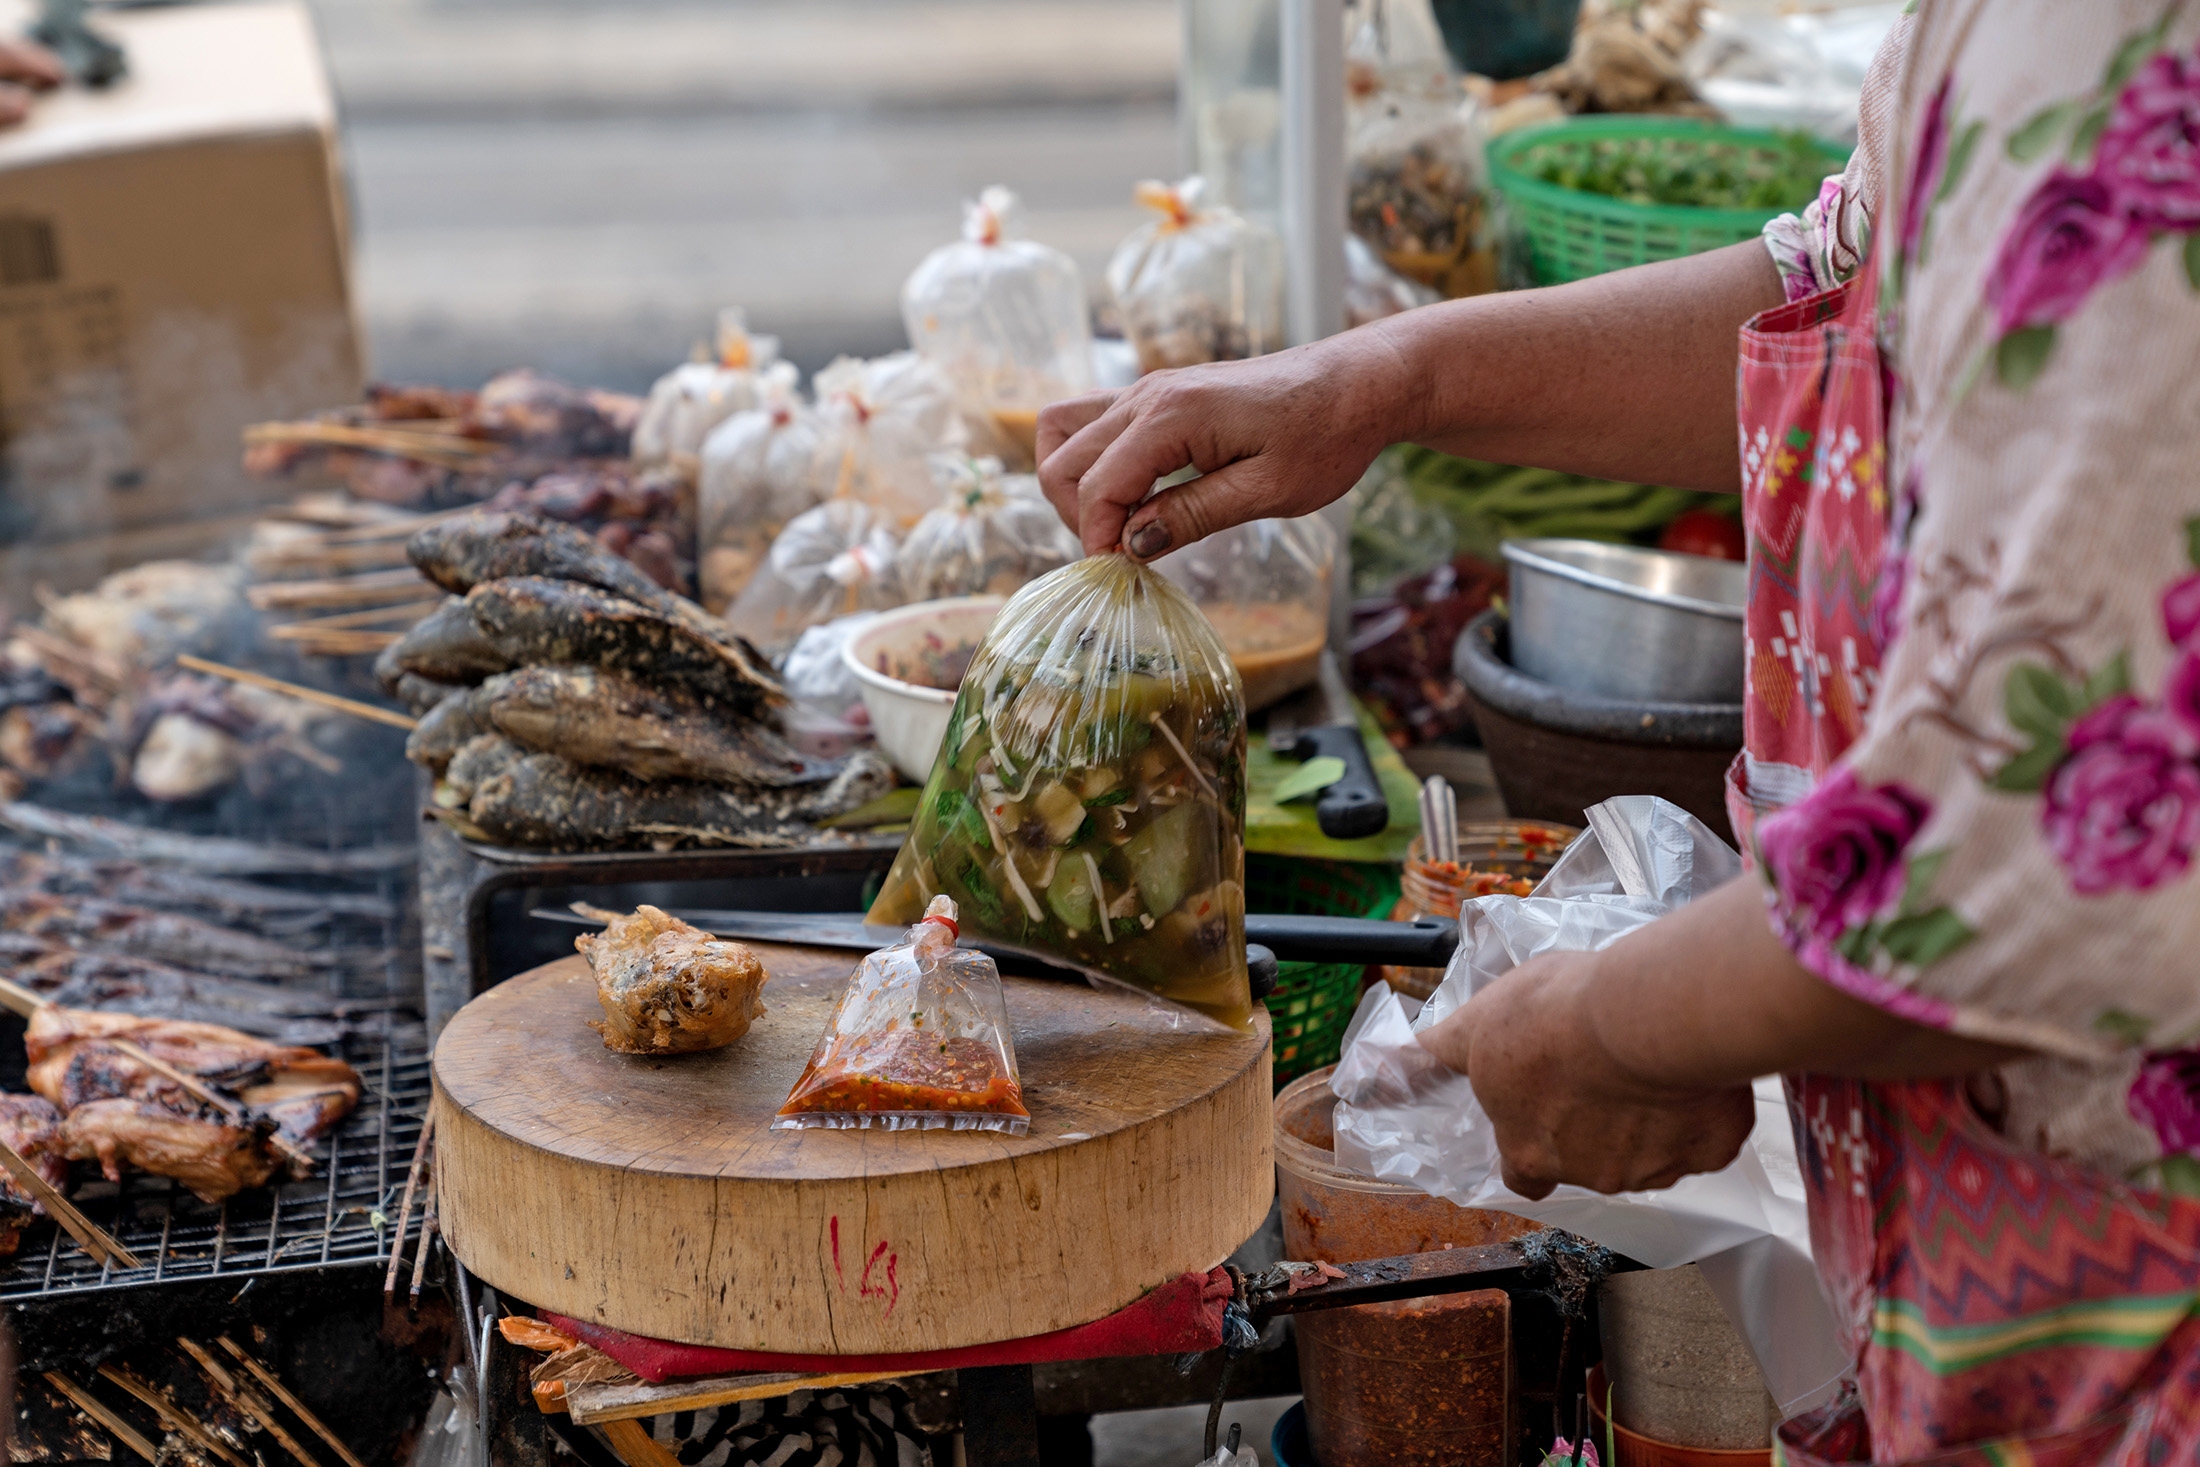 Bangkok Street-Food Stalls Are Trying to Give Up Plastic Bags - Bloomberg